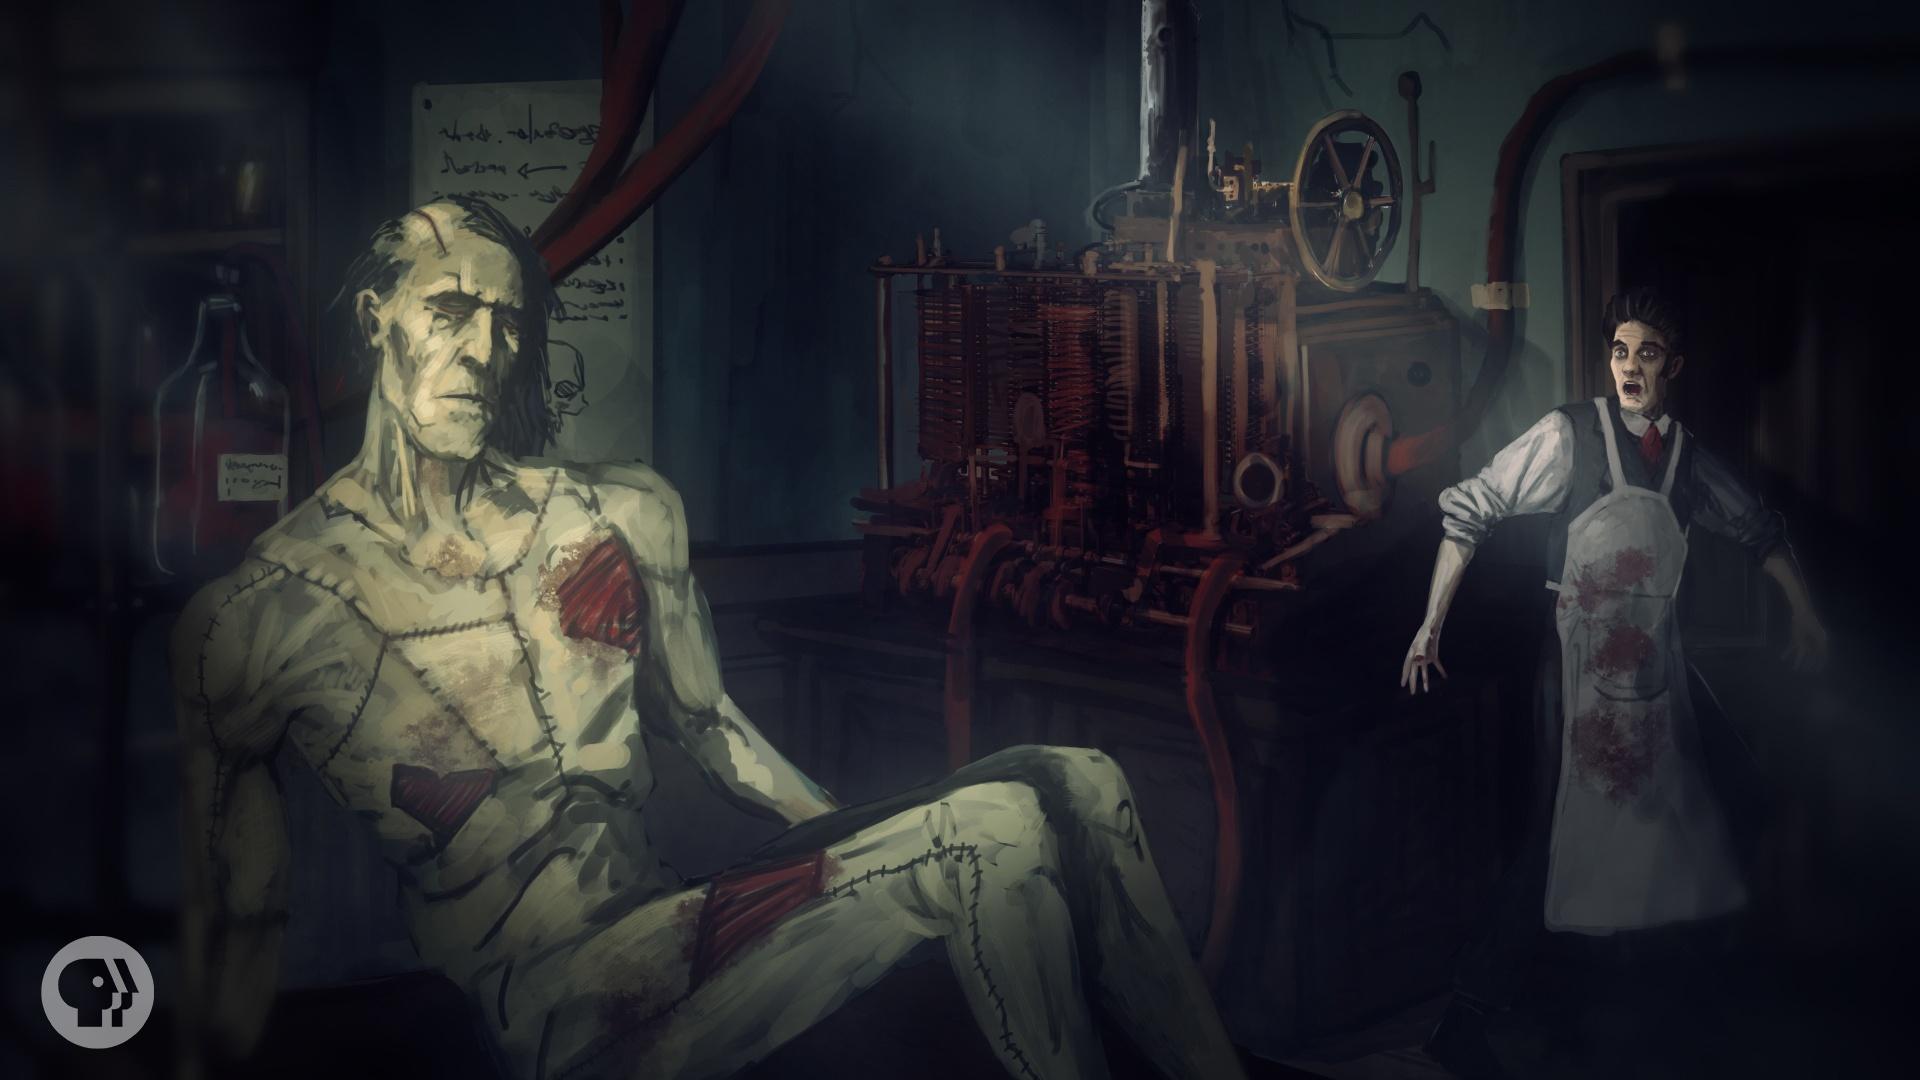 A graphic of a monster in the forefront and the scientist, Frankenstein, in a white apron in the background.